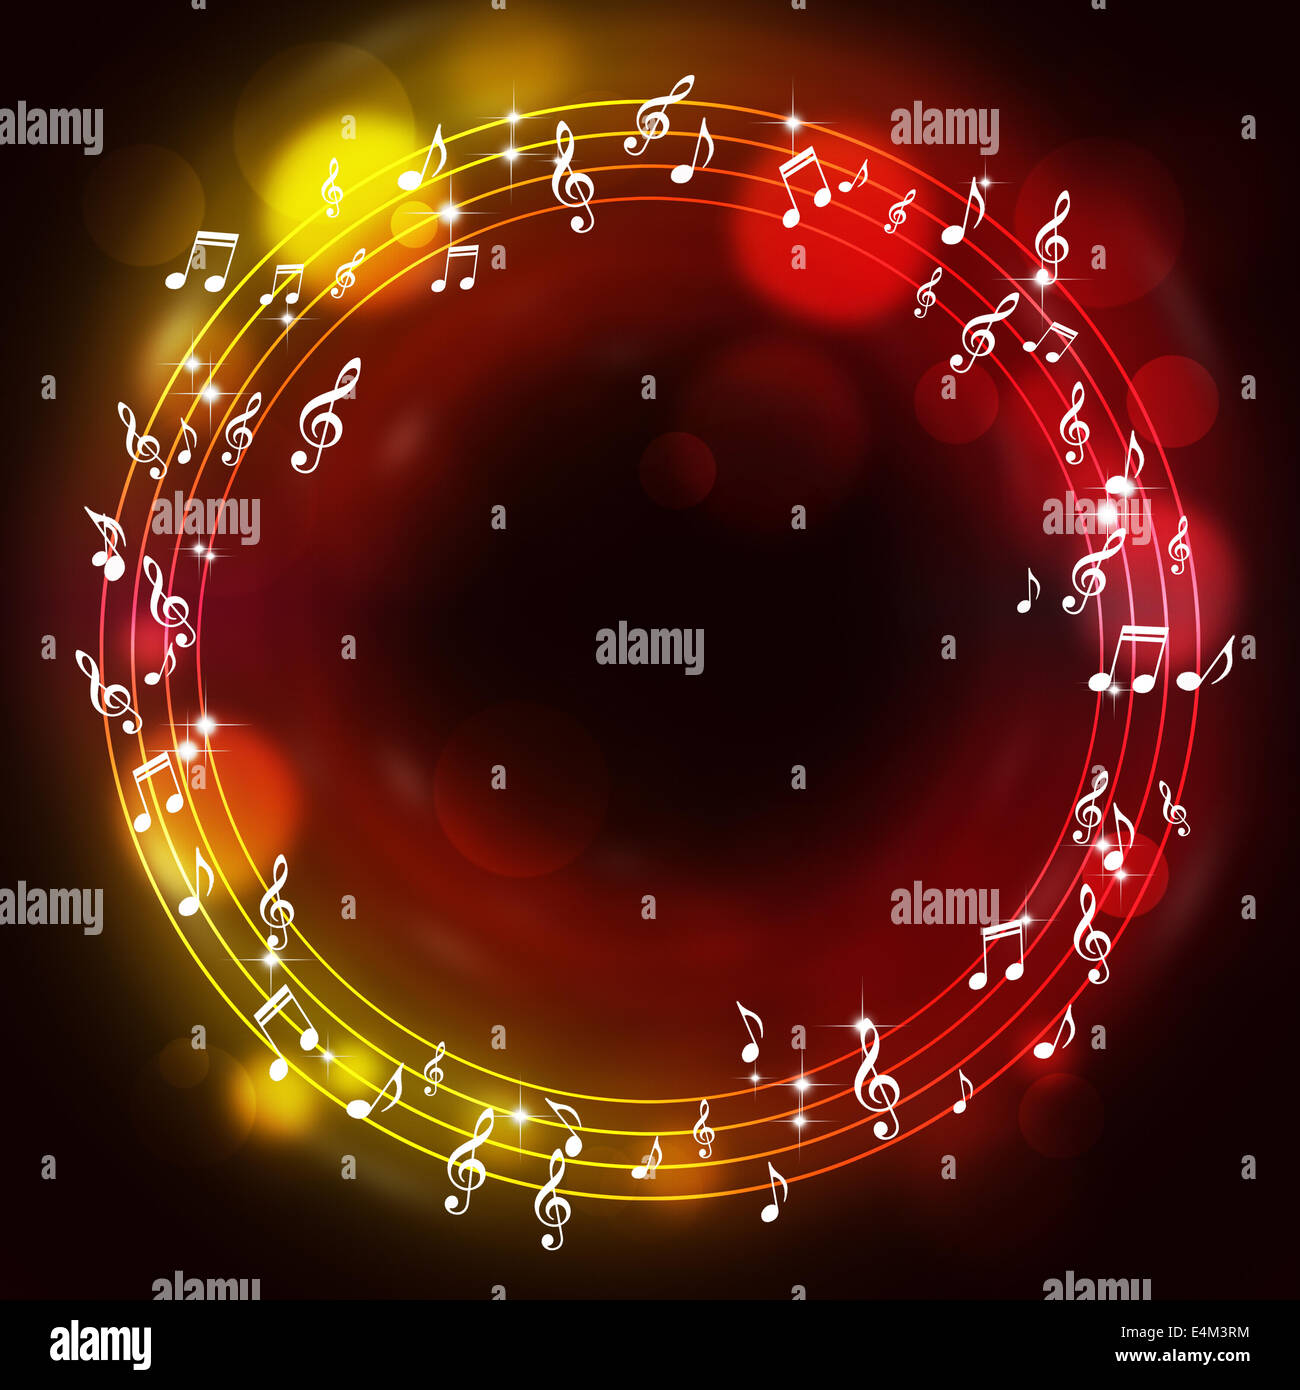 abtract music notes multicolor background for joyful events Stock Photo